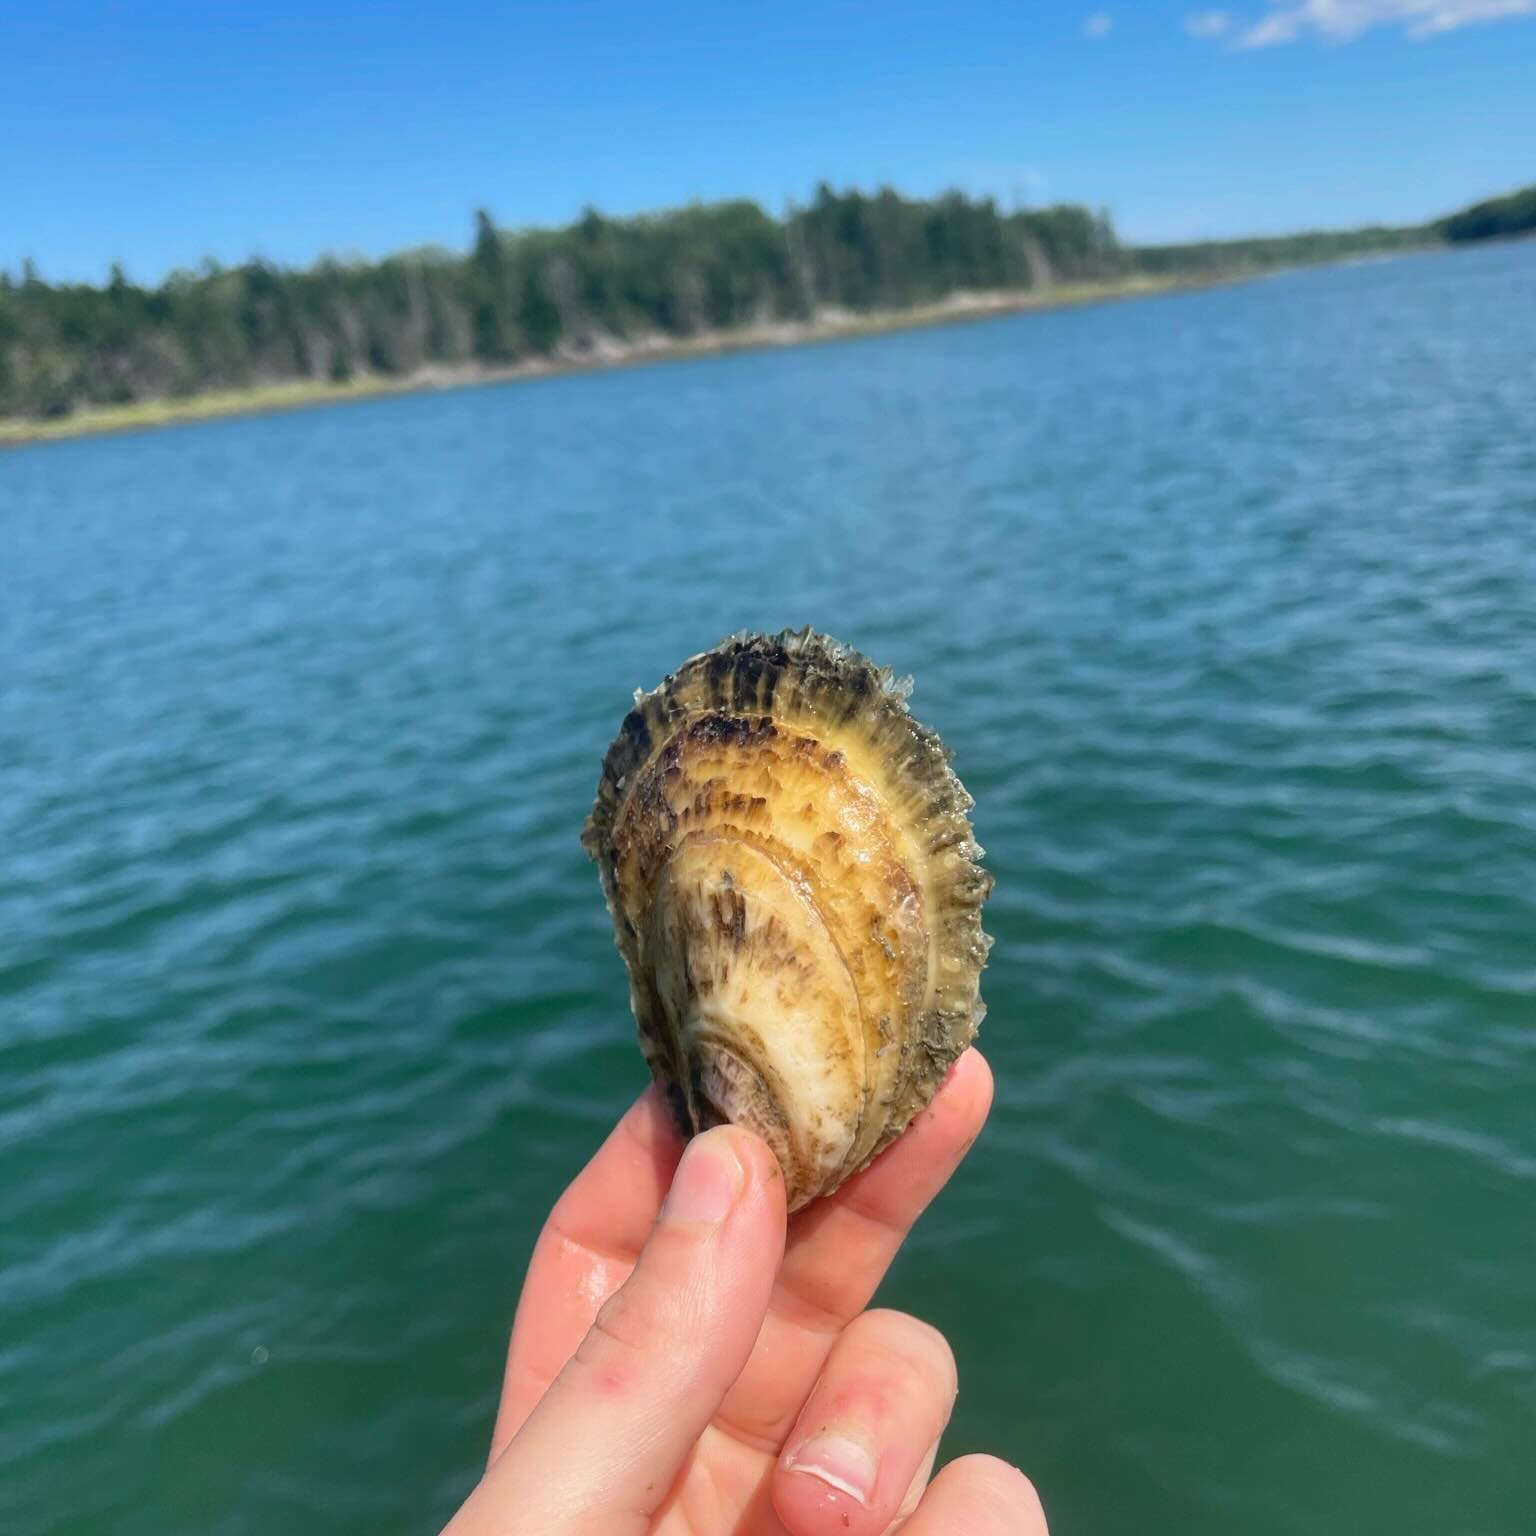 Attention Oyster Lovers‼️
🦪 Due to upcoming changes in state regulations, we unfortunately won&rsquo;t be able to offer our delicious oysters through our workshop from June 1st - October 15th. 
🦪 But don&rsquo;t worry, Maine harvesters are resilien